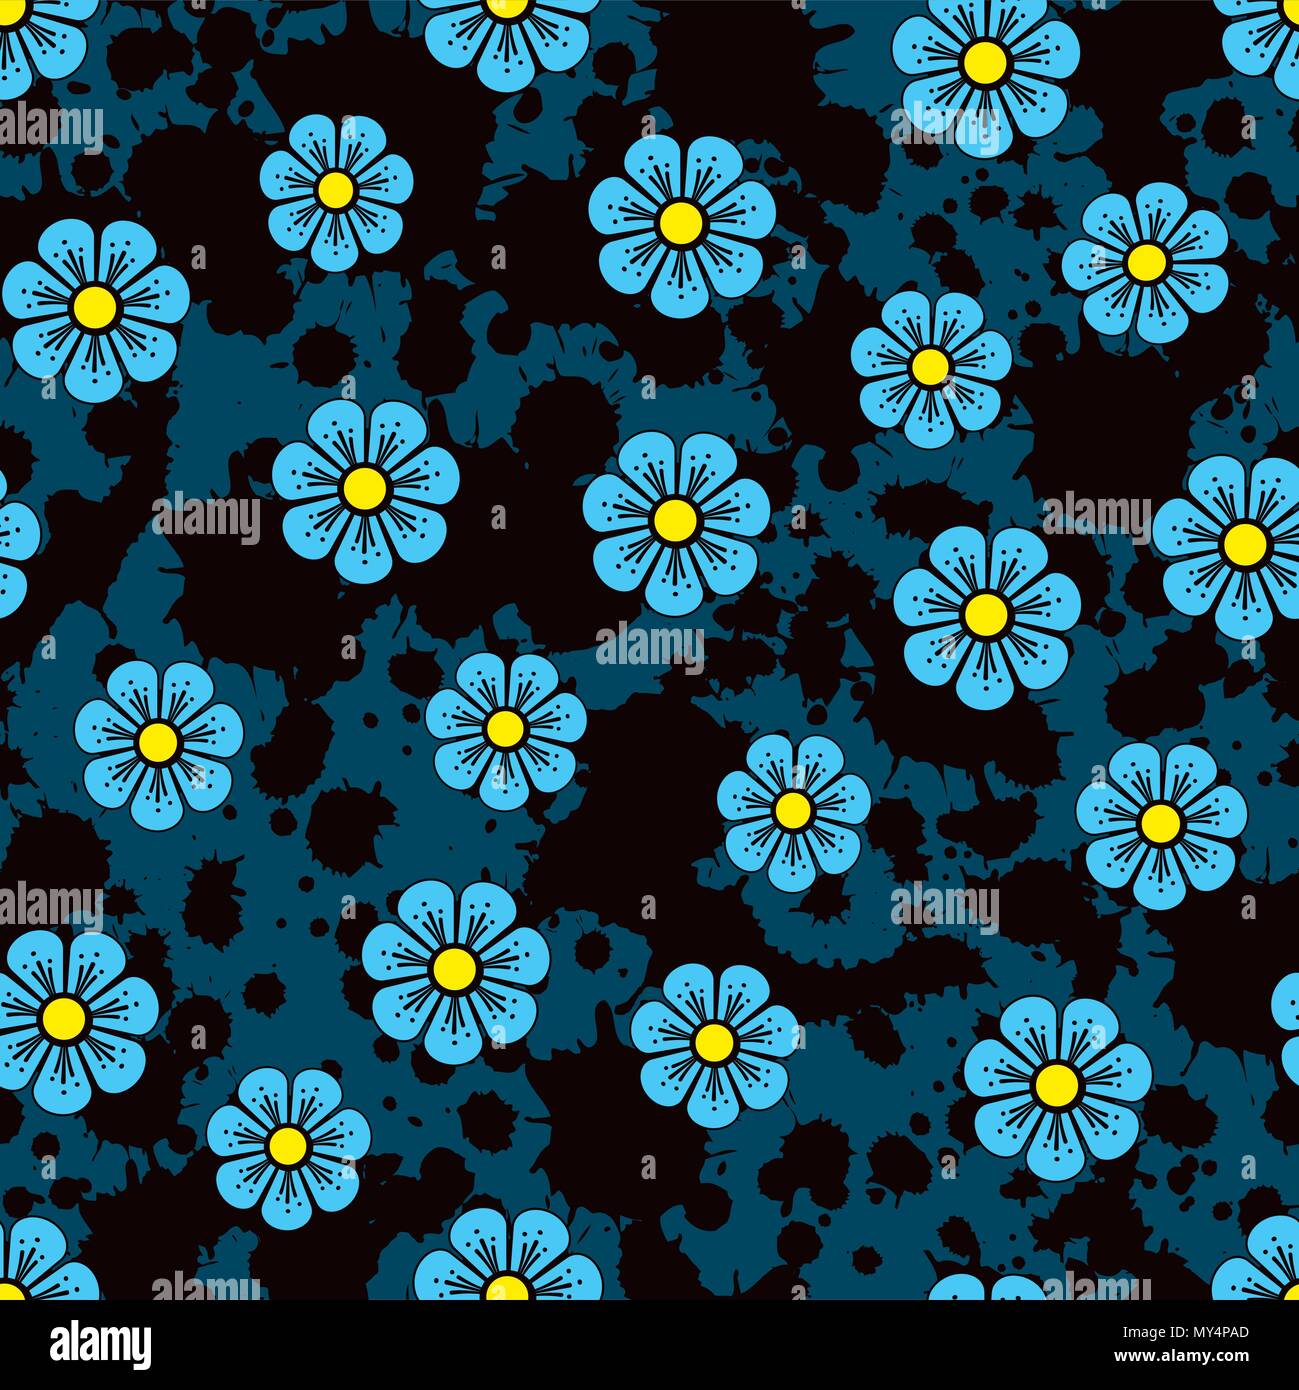 Flower pattern. Small blue flowers on a ink background. Use on wallpaper, fabric and textures Stock Vector